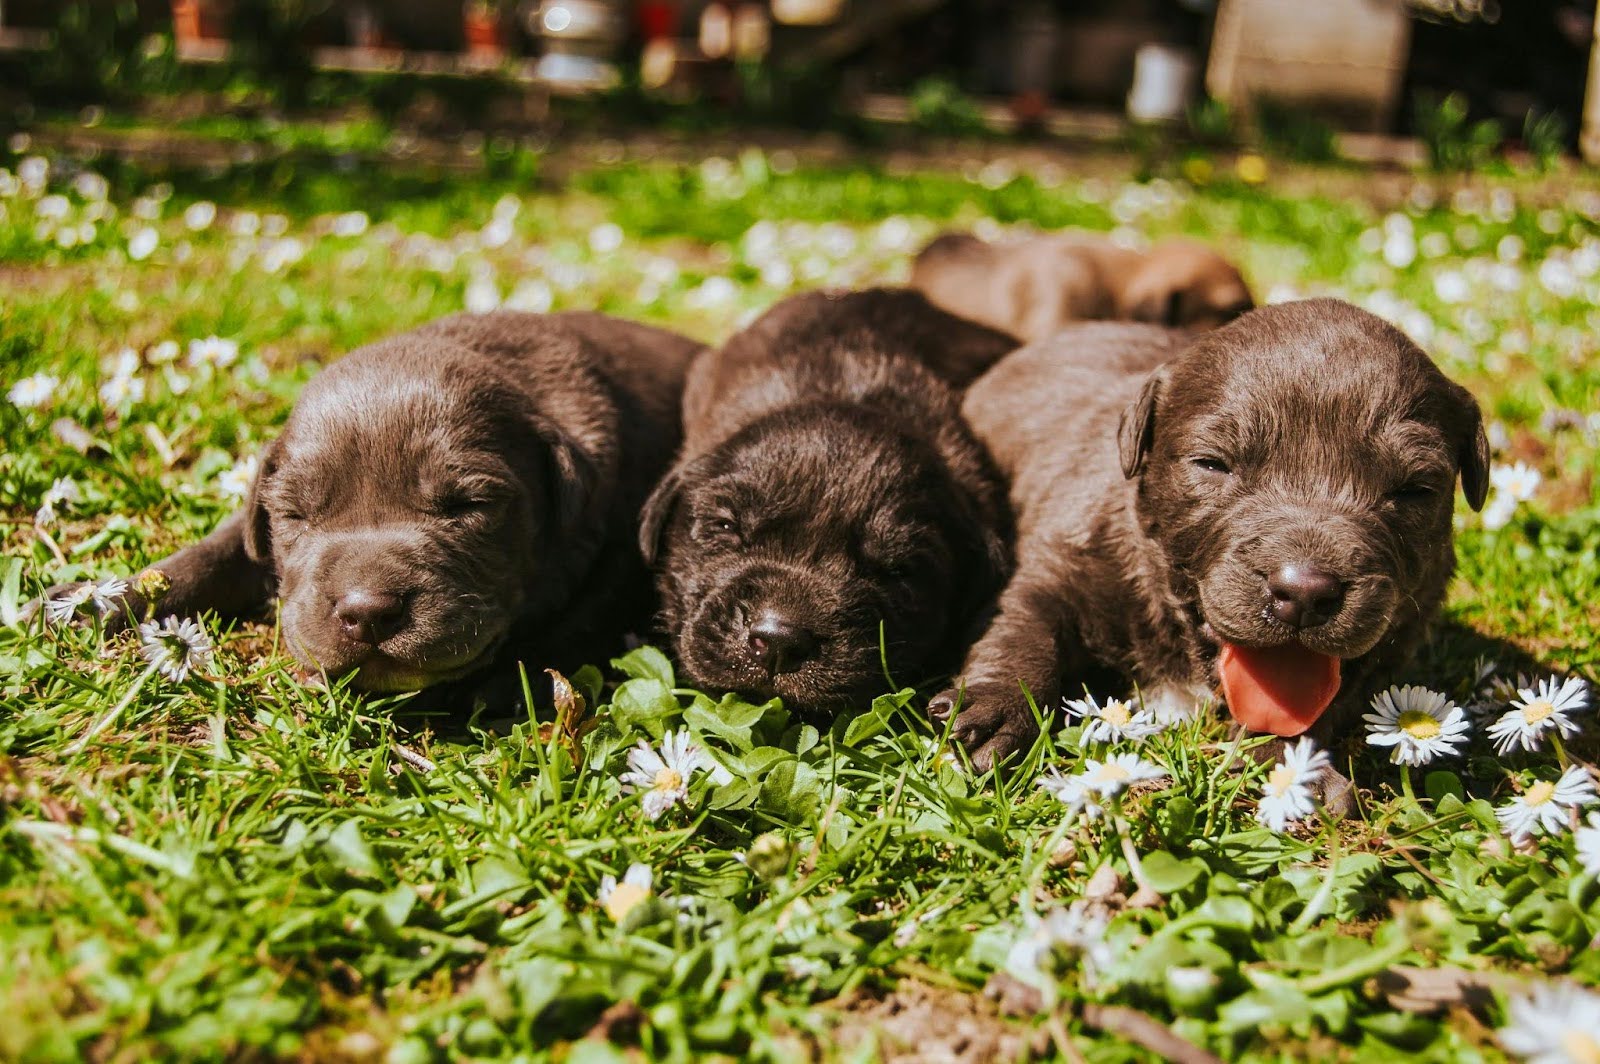 Three very young black puppies lie side by side in the grass while the puppy on the right sticks its tongue out.